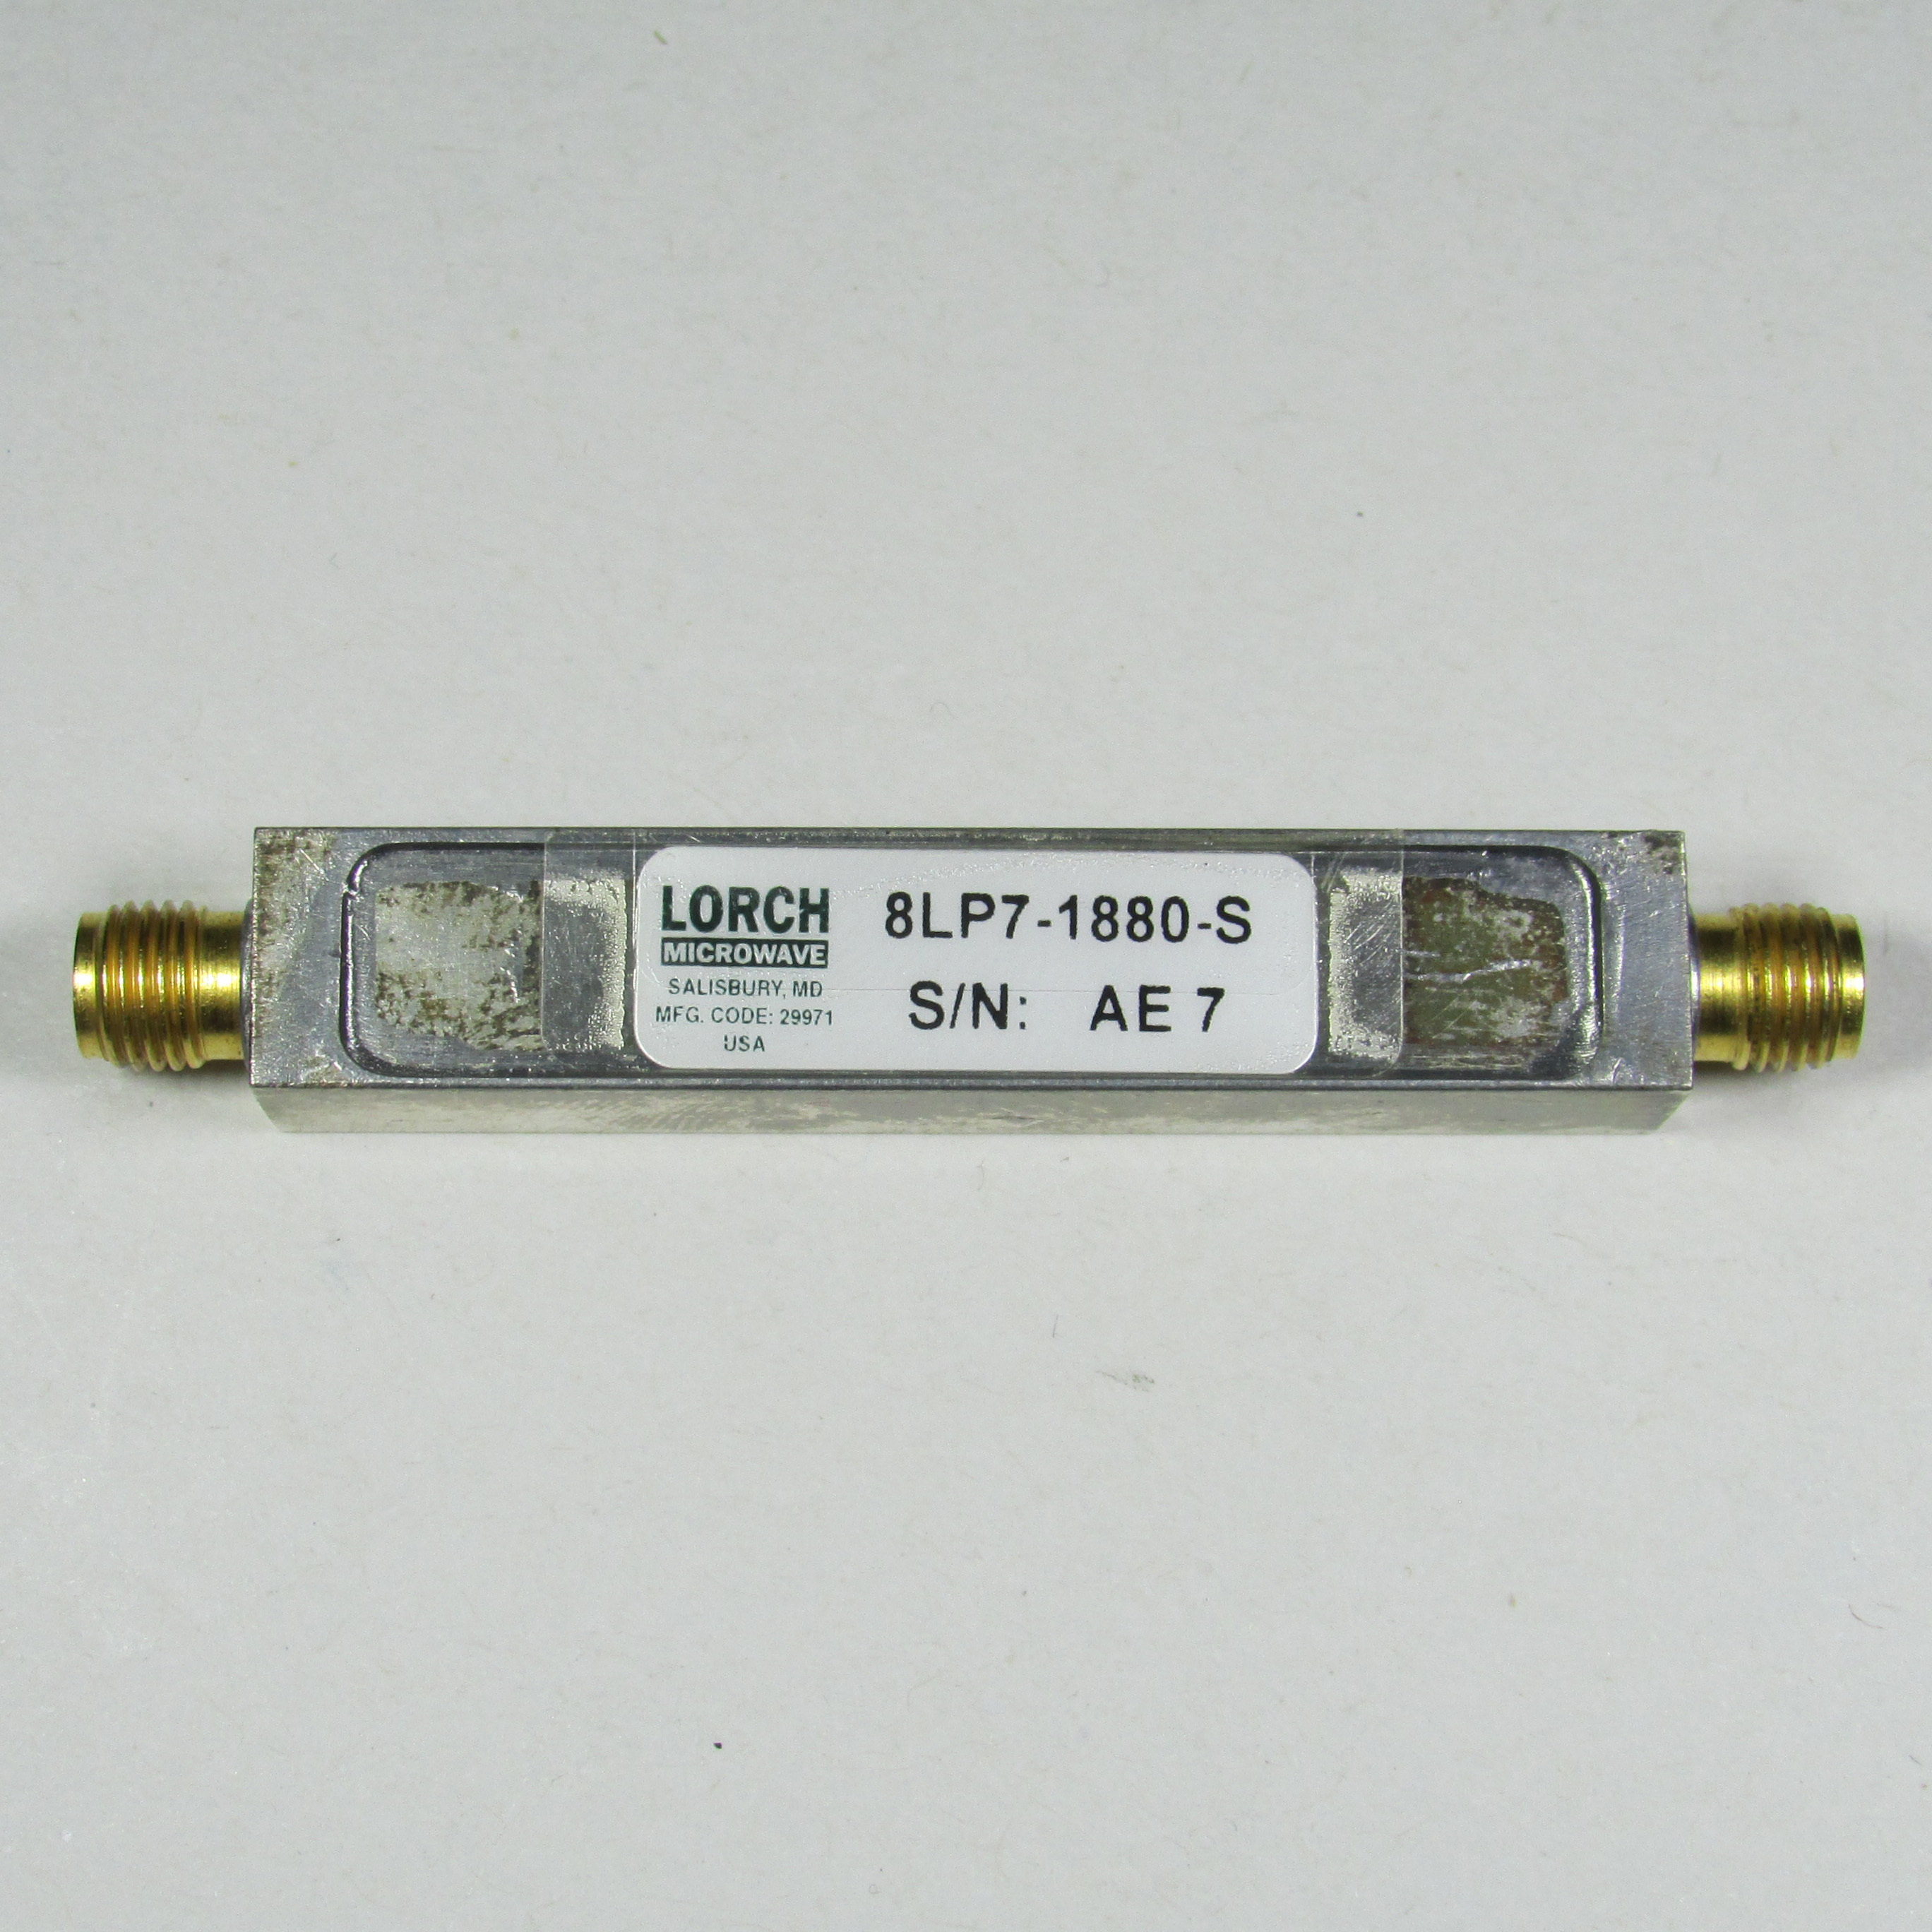 LORCH 8LP7-1880-S 1880MHz SMA Low Pass Filter